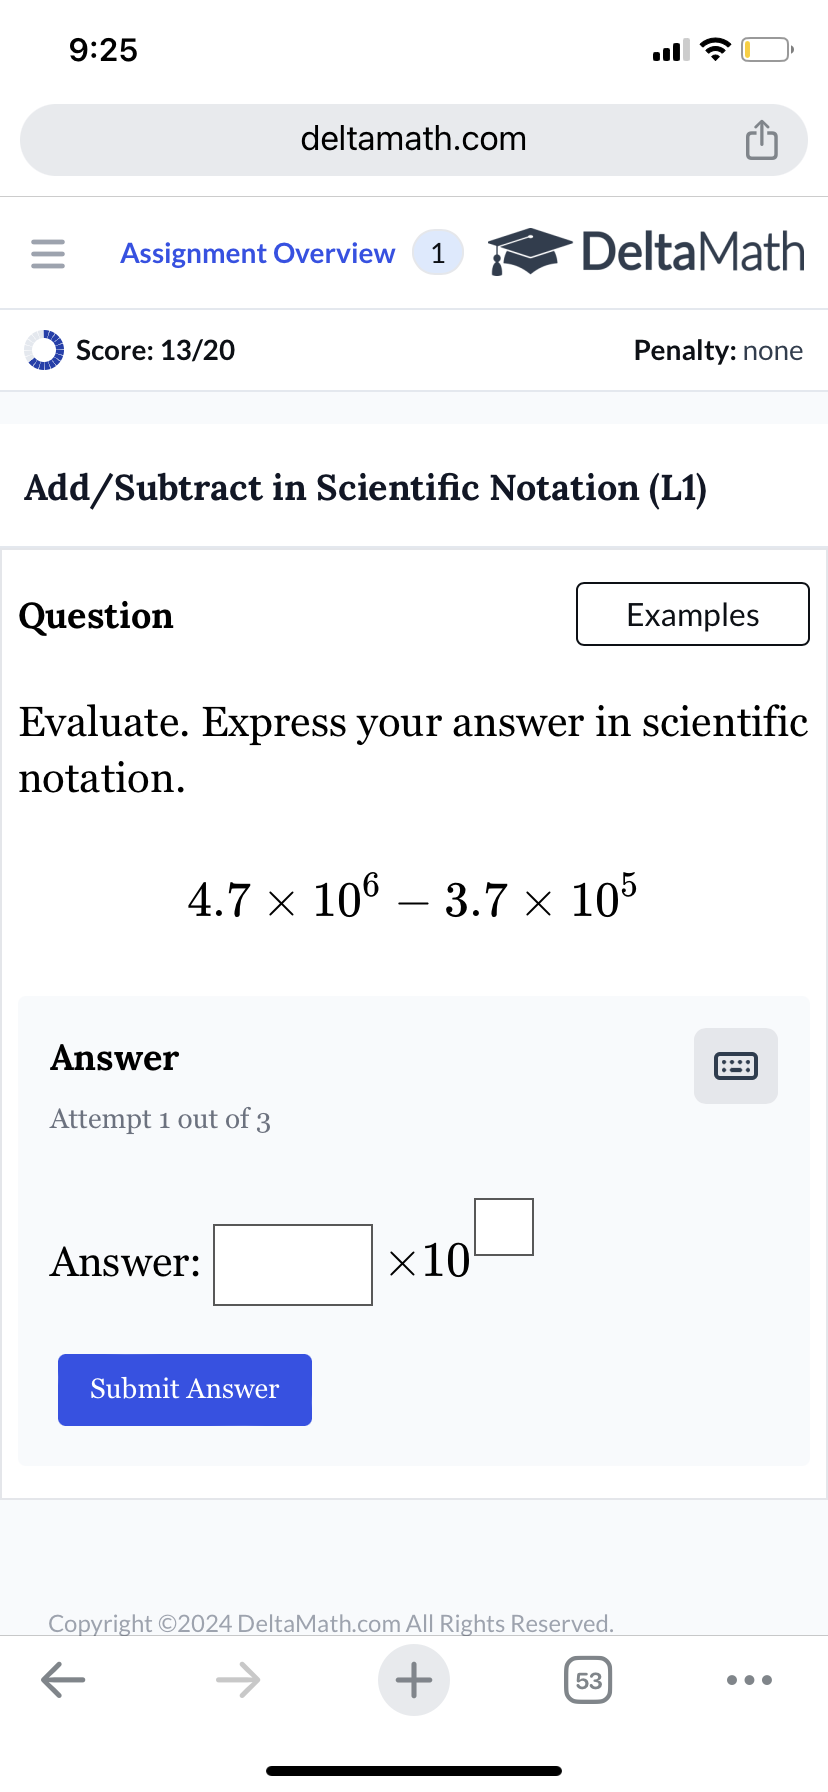 9:25
deltamath.com
= Assignment Overview 1
DeltaMath
Score: 13/20
Penalty: none
Add/Subtract in Scientific Notation (L1)
Question
Examples
Evaluate. Express your answer in scientific
notation.
4.7 × 106 – 3.7 × 105
Answer
Attempt 1 out of 3
Answer:
Submit Answer
×10
Copyright ©2024 DeltaMath.com All Rights Reserved.
←
+
53